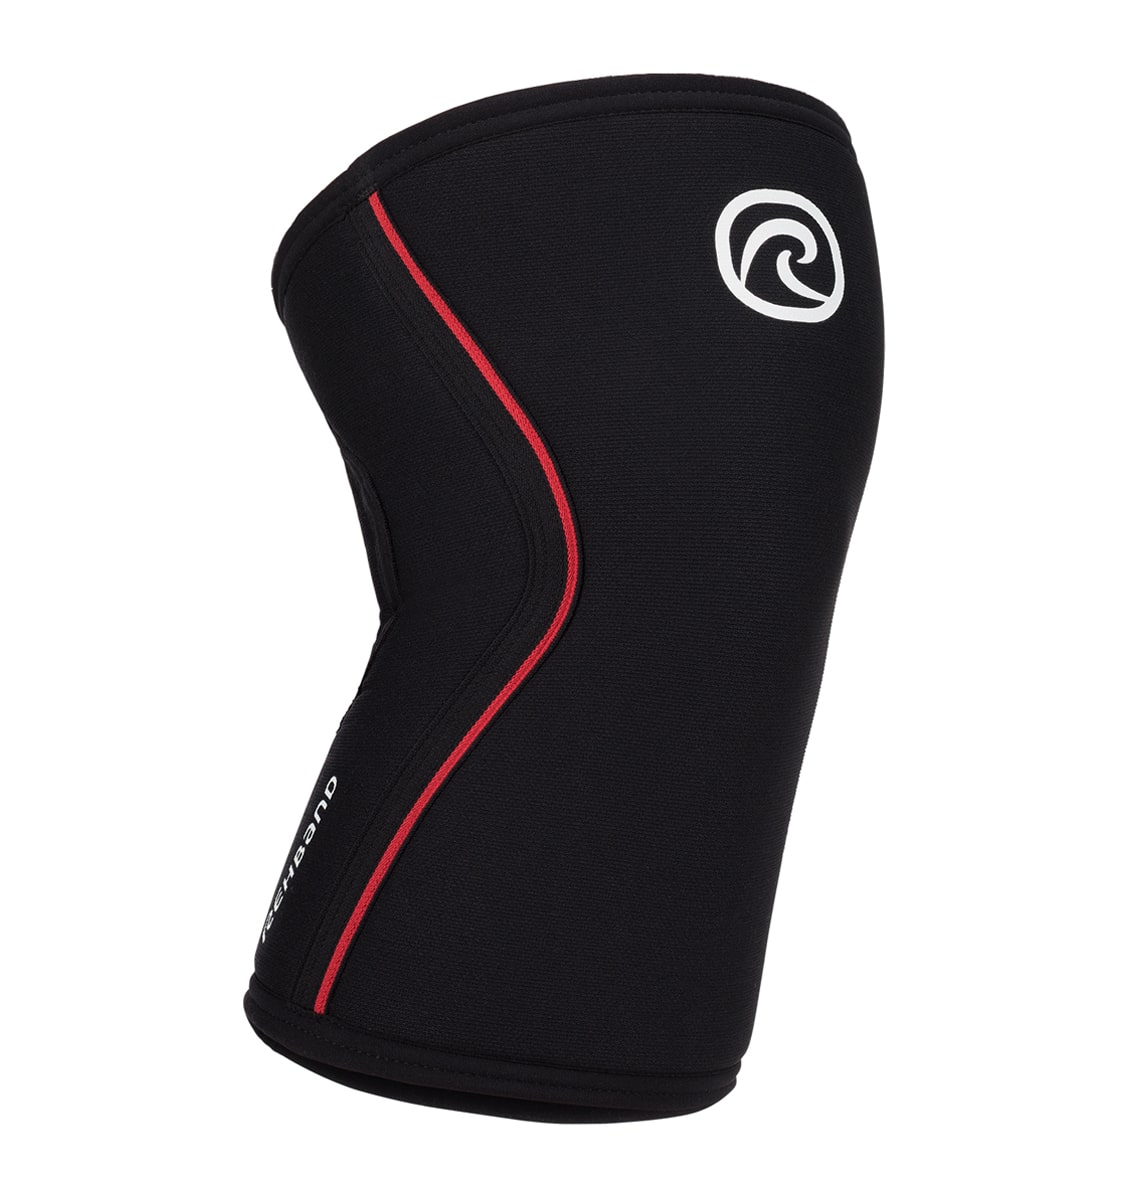 105436-02 - Rehband Rx Knee Sleeve - Black/Red - 7mm - Front